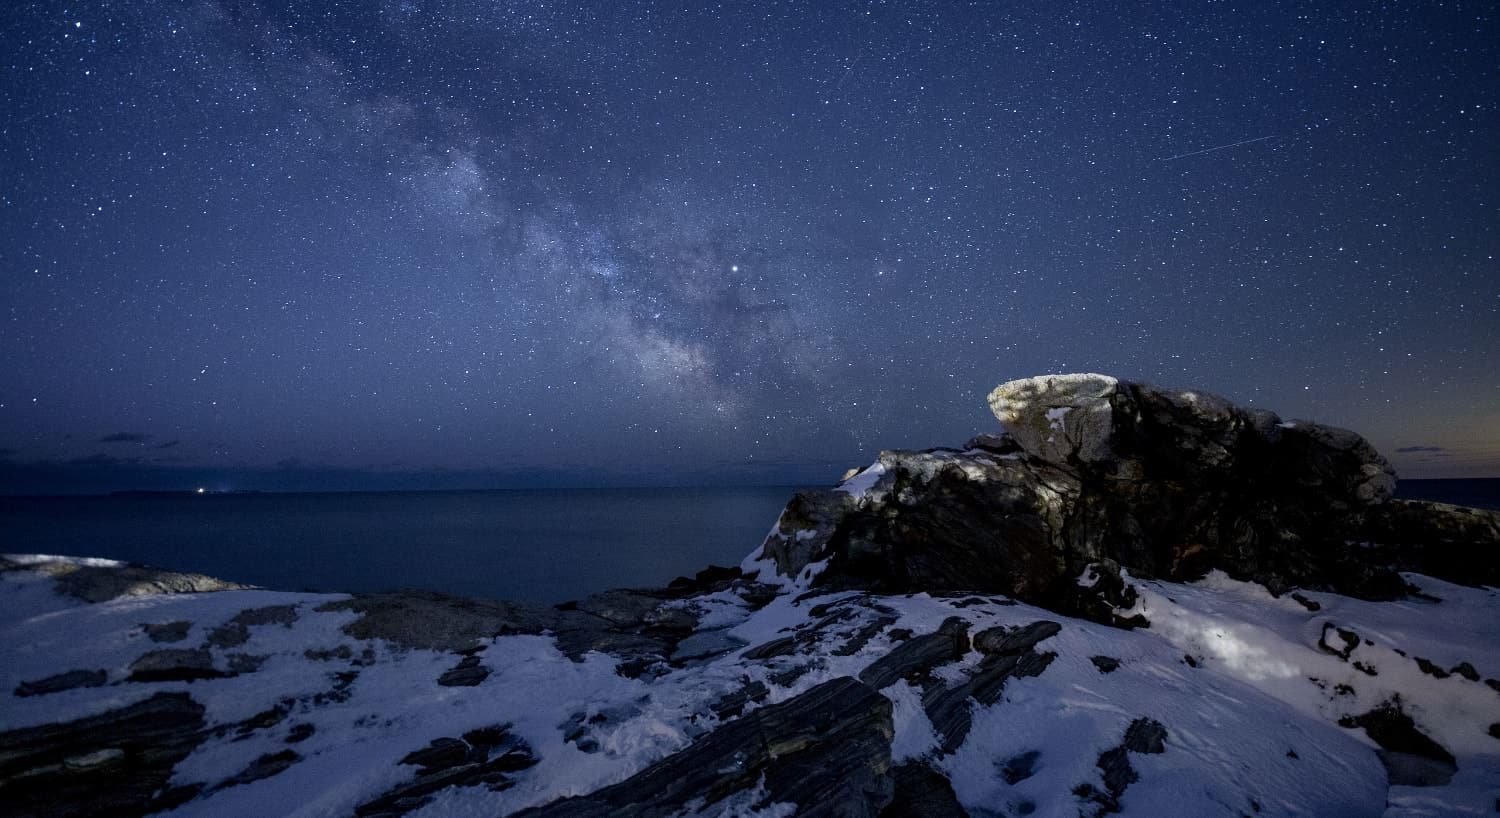 Weathered large rock formations covered by snow near the ocean at night with stars in the sky